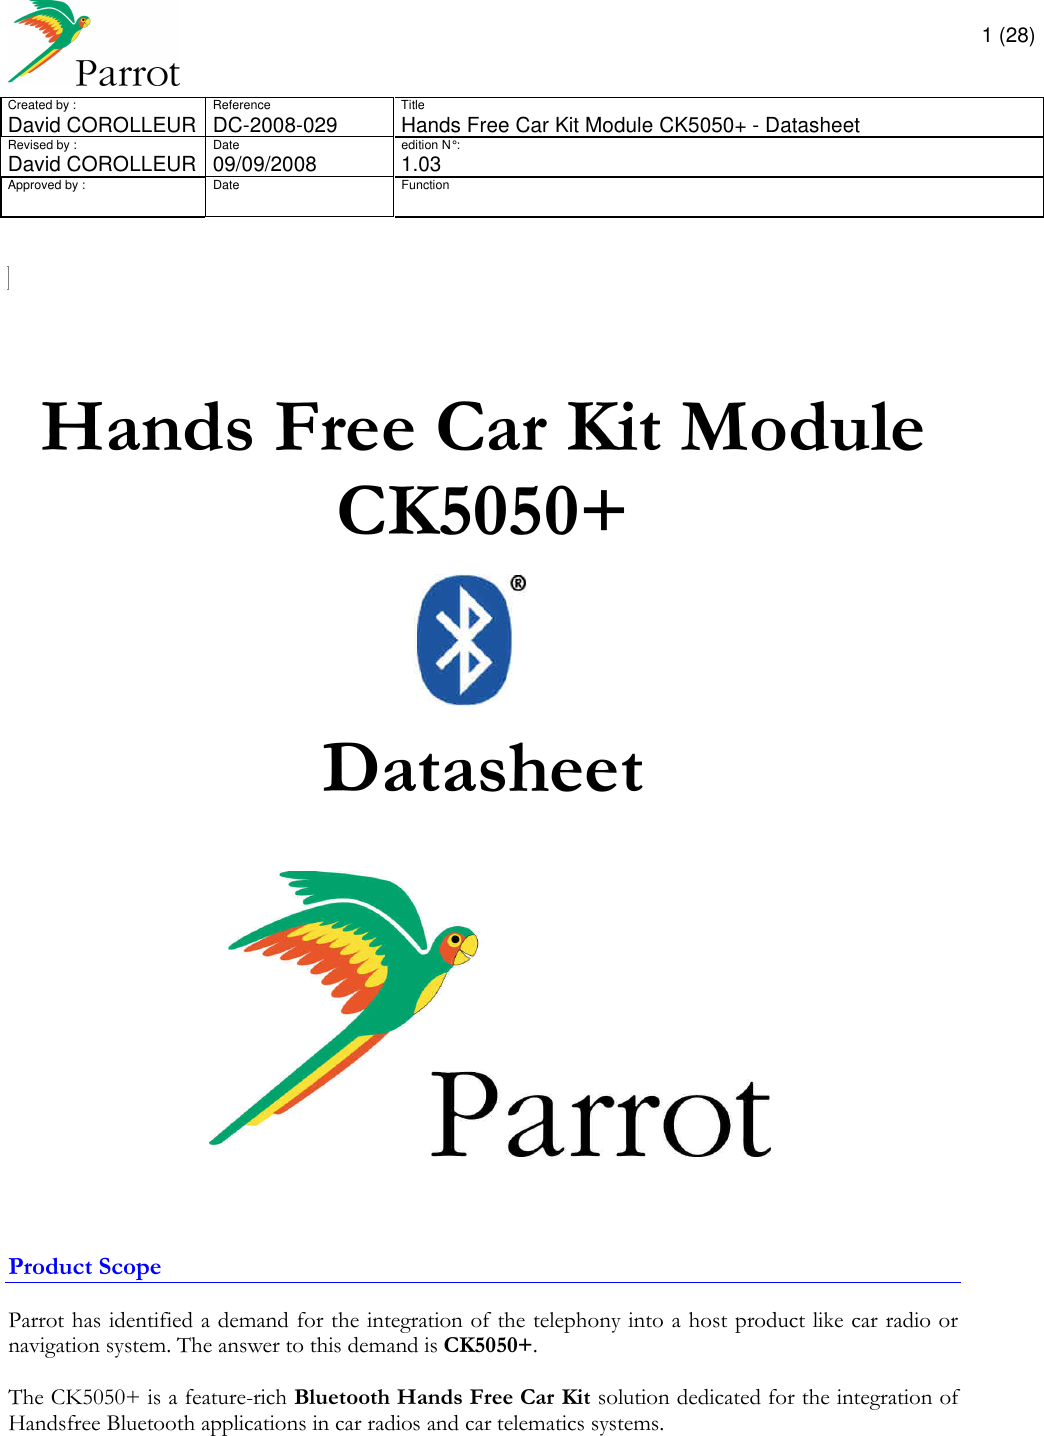       1 (28) Created by :  Reference  Title David COROLLEUR  DC-2008-029  Hands Free Car Kit Module CK5050+ - Datasheet  Revised by :  Date  edition N° :  David COROLLEUR 09/09/2008   1.03 Approved by :  Date  Function                       Hands Free Car Kit Module CK5050+    Datasheet       Product Scope  Parrot has identified a demand for the integration of the telephony into a host product like car radio or navigation system. The answer to this demand is CK5050+.  The CK5050+ is a feature-rich Bluetooth Hands Free Car Kit solution dedicated for the integration of Handsfree Bluetooth applications in car radios and car telematics systems.       